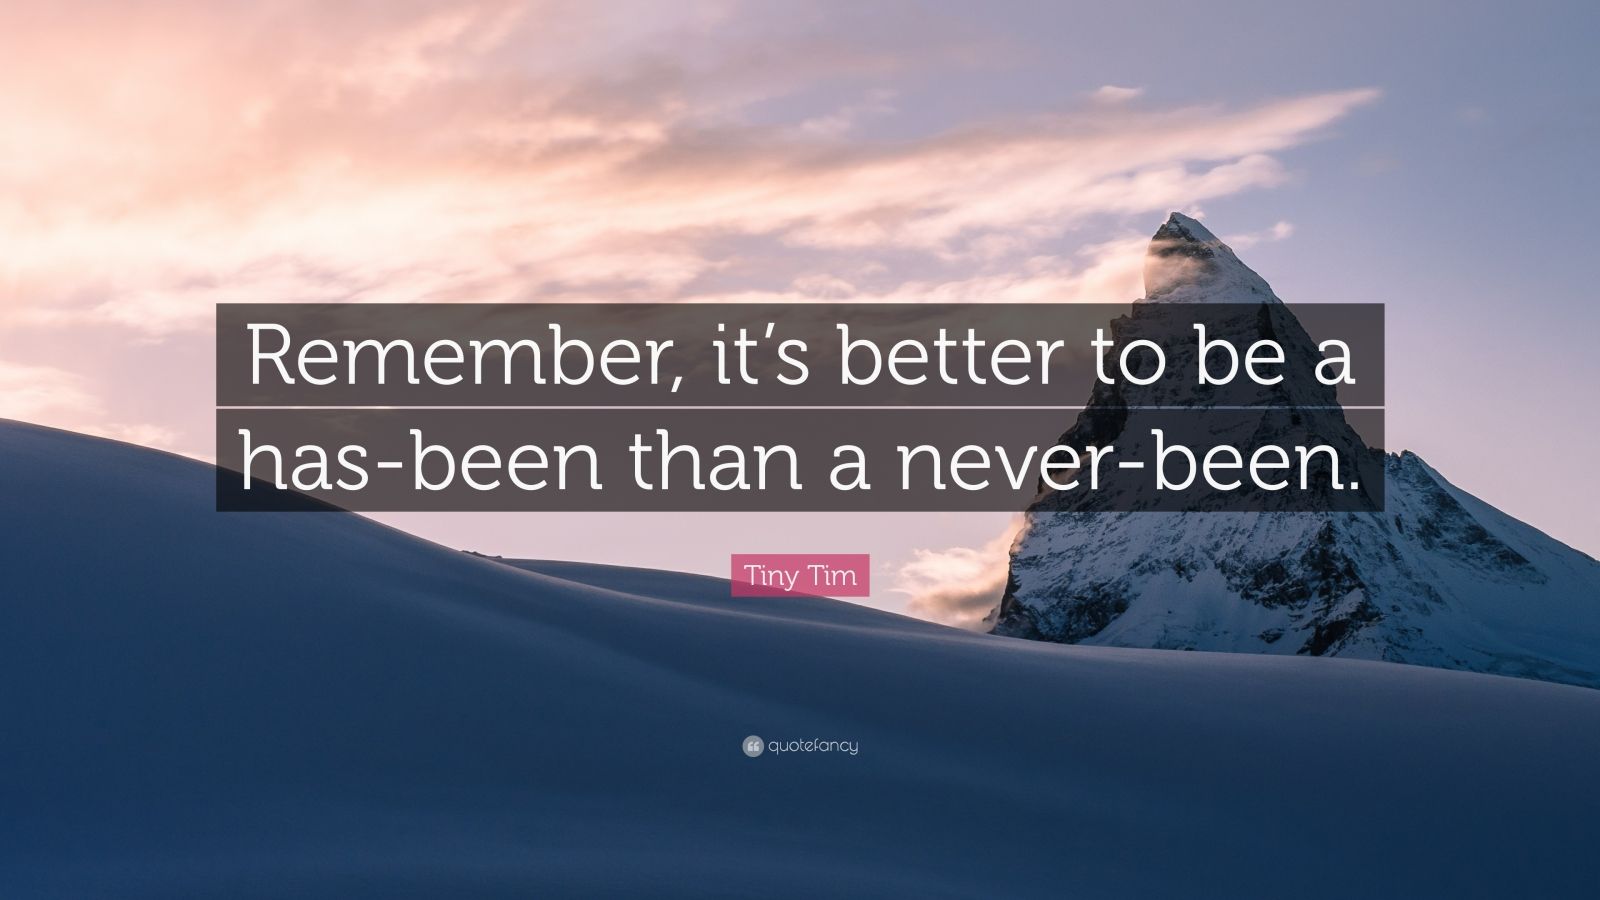 Tiny Tim Quote: "Remember, it's better to be a has-been than a never-been." (7 wallpapers ...